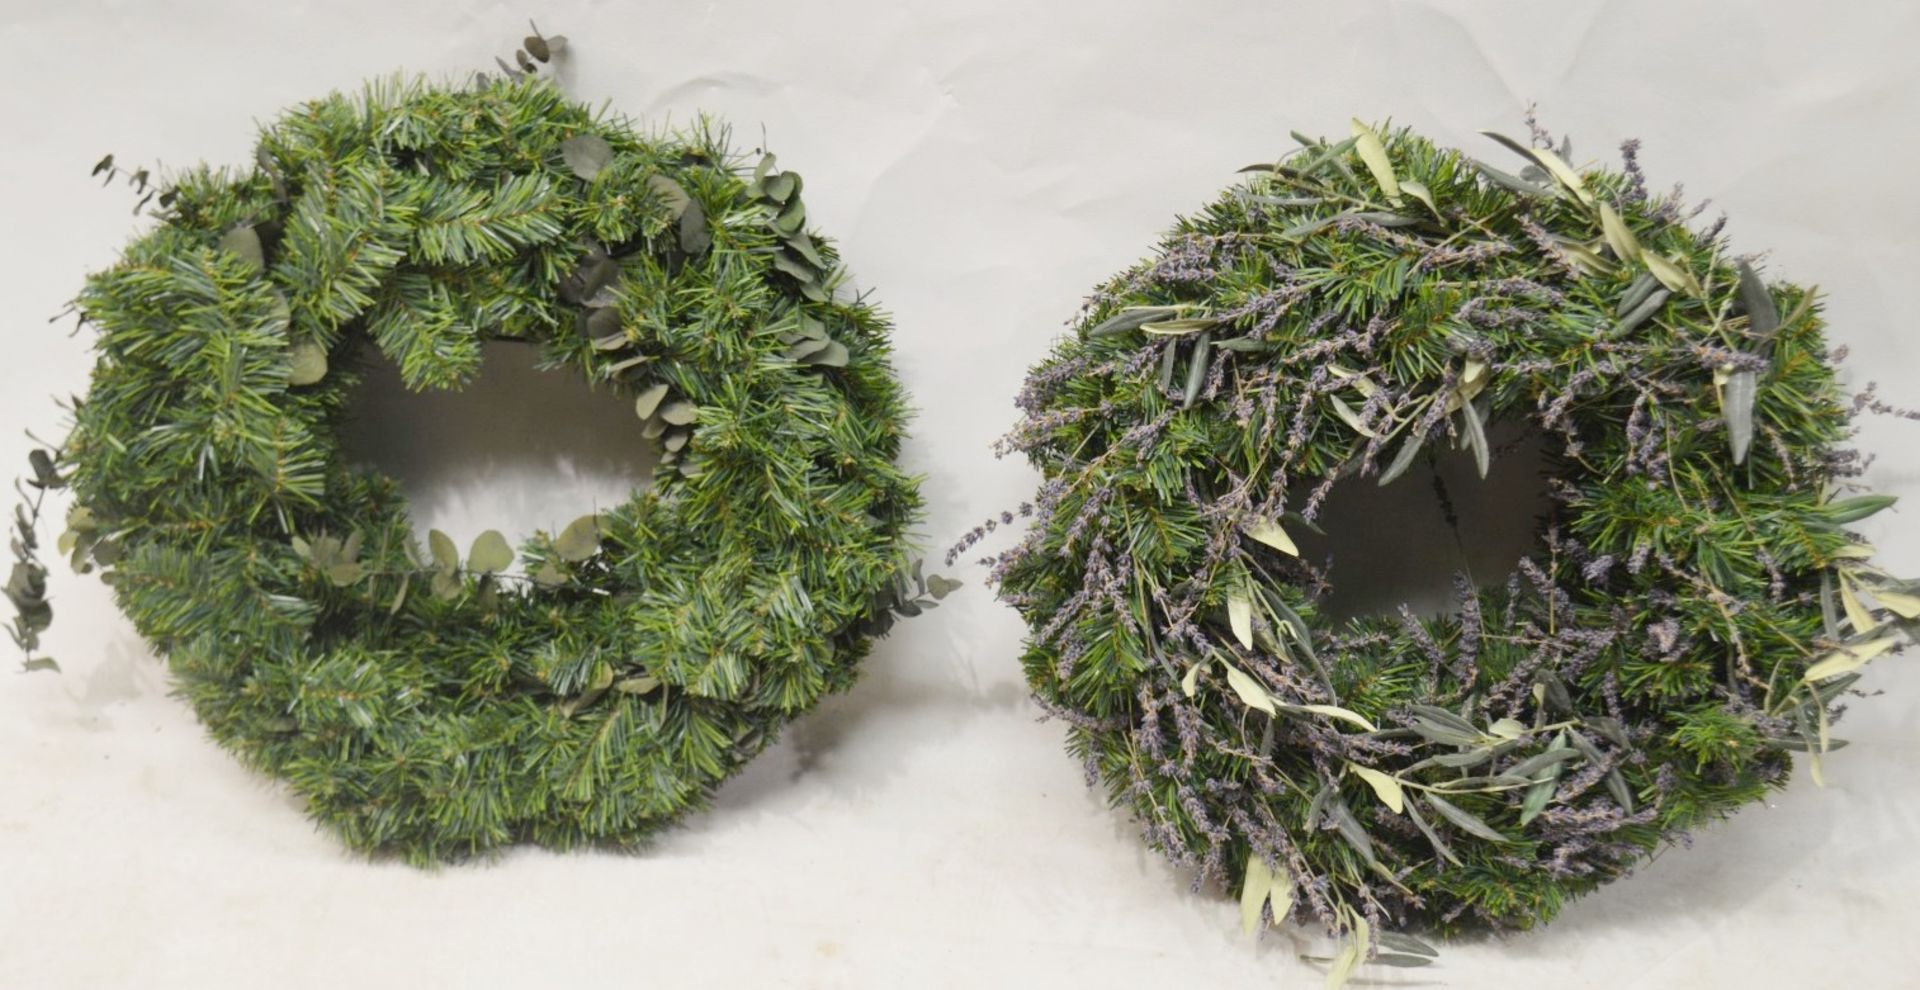 5 x Commercial Decorative Christmas Wreaths - Variety As Shown - Mostly 50cm In Diameter - Ex- - Image 2 of 5